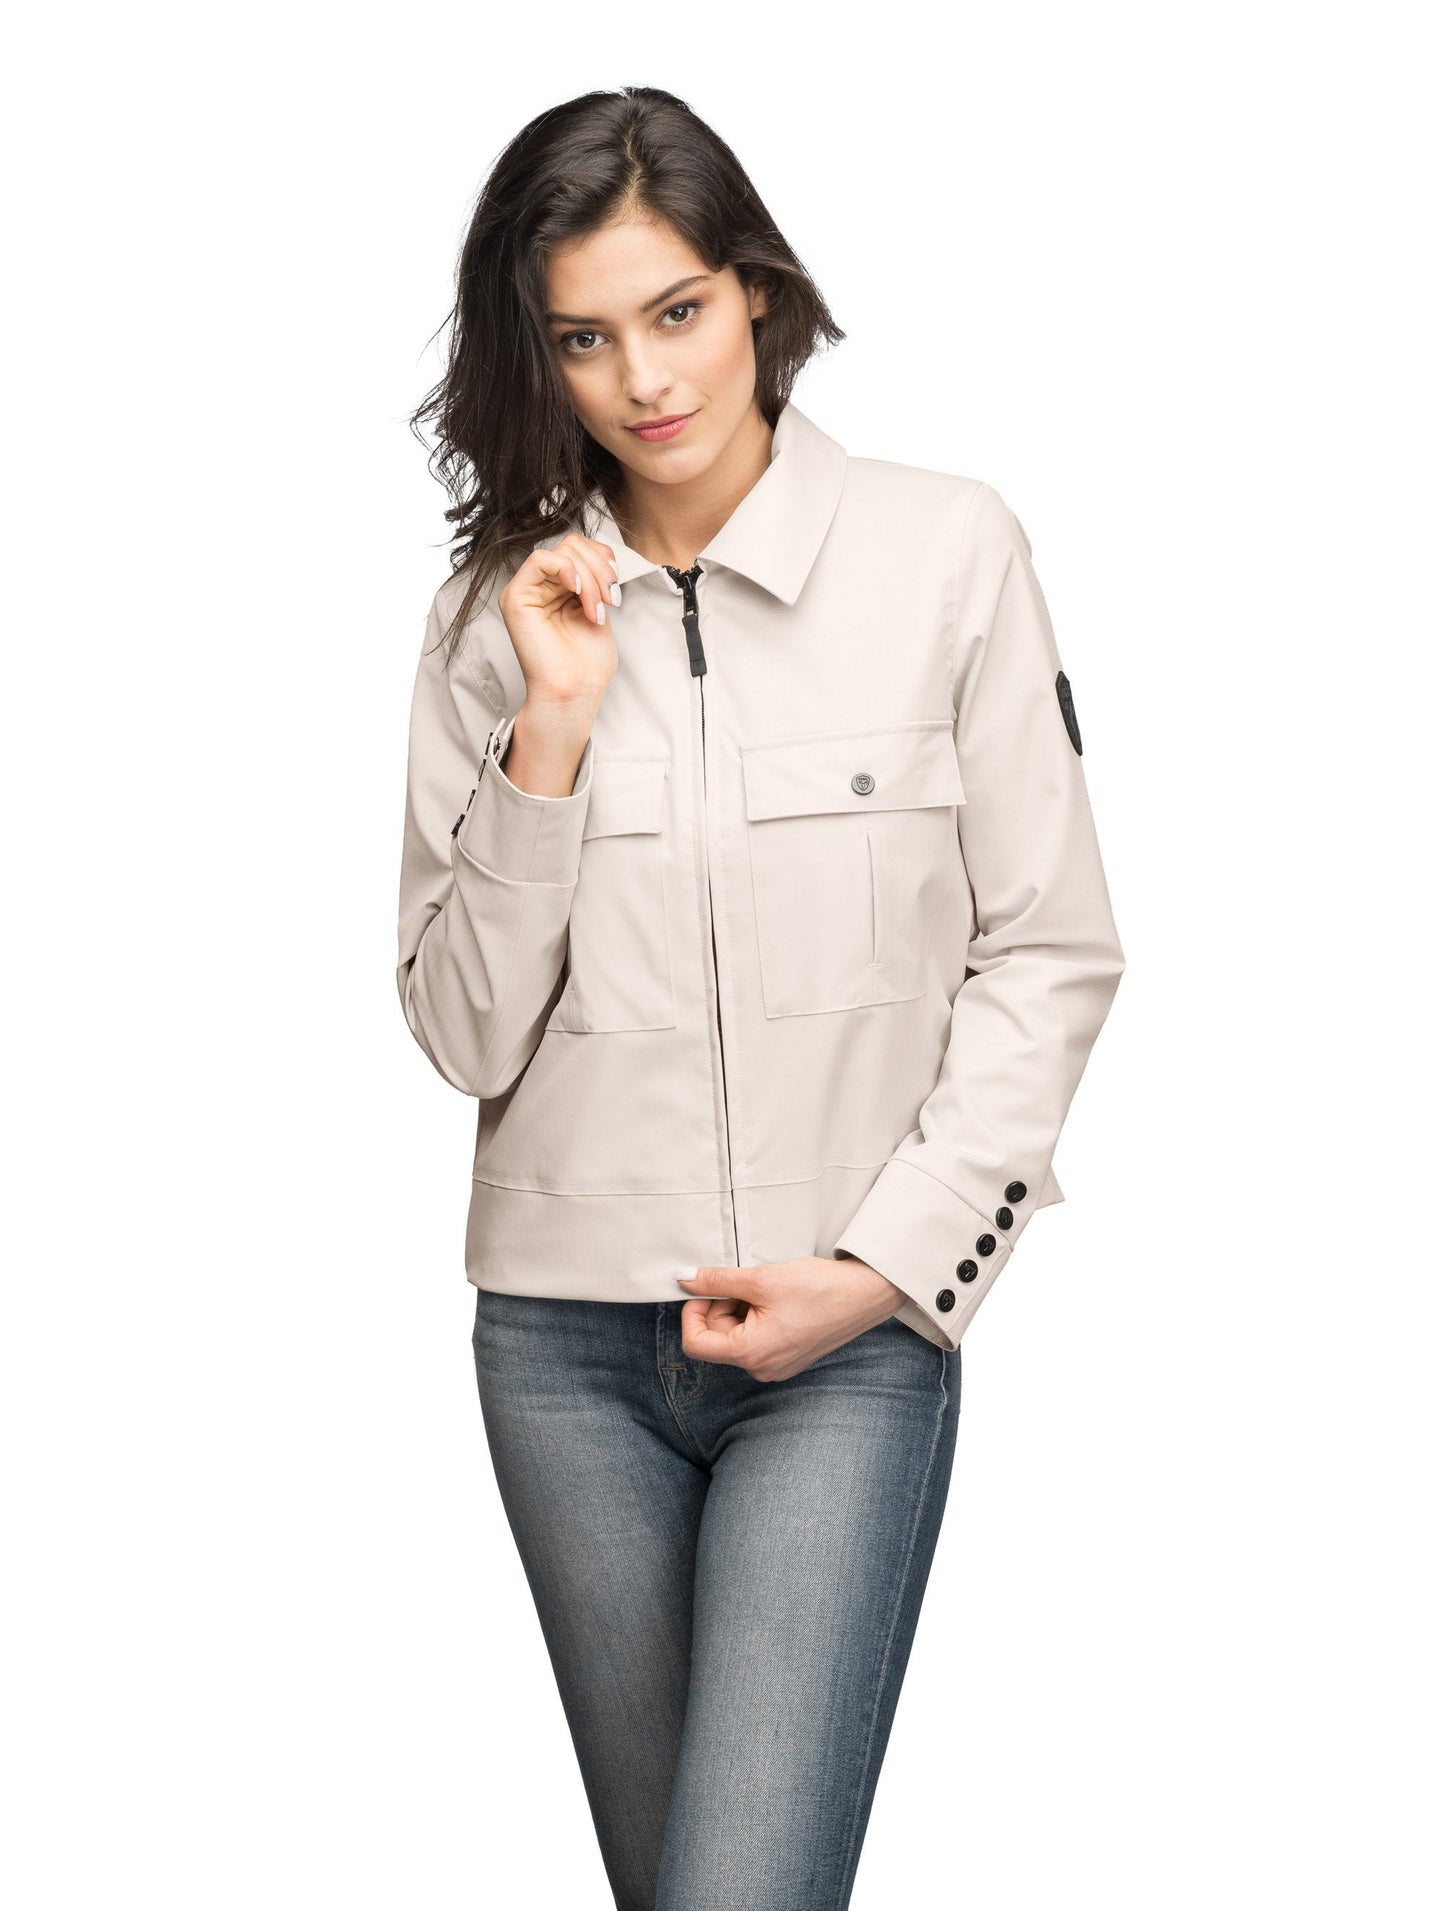 Women's cropped military inspired jacket with shirt collar detail in Camel